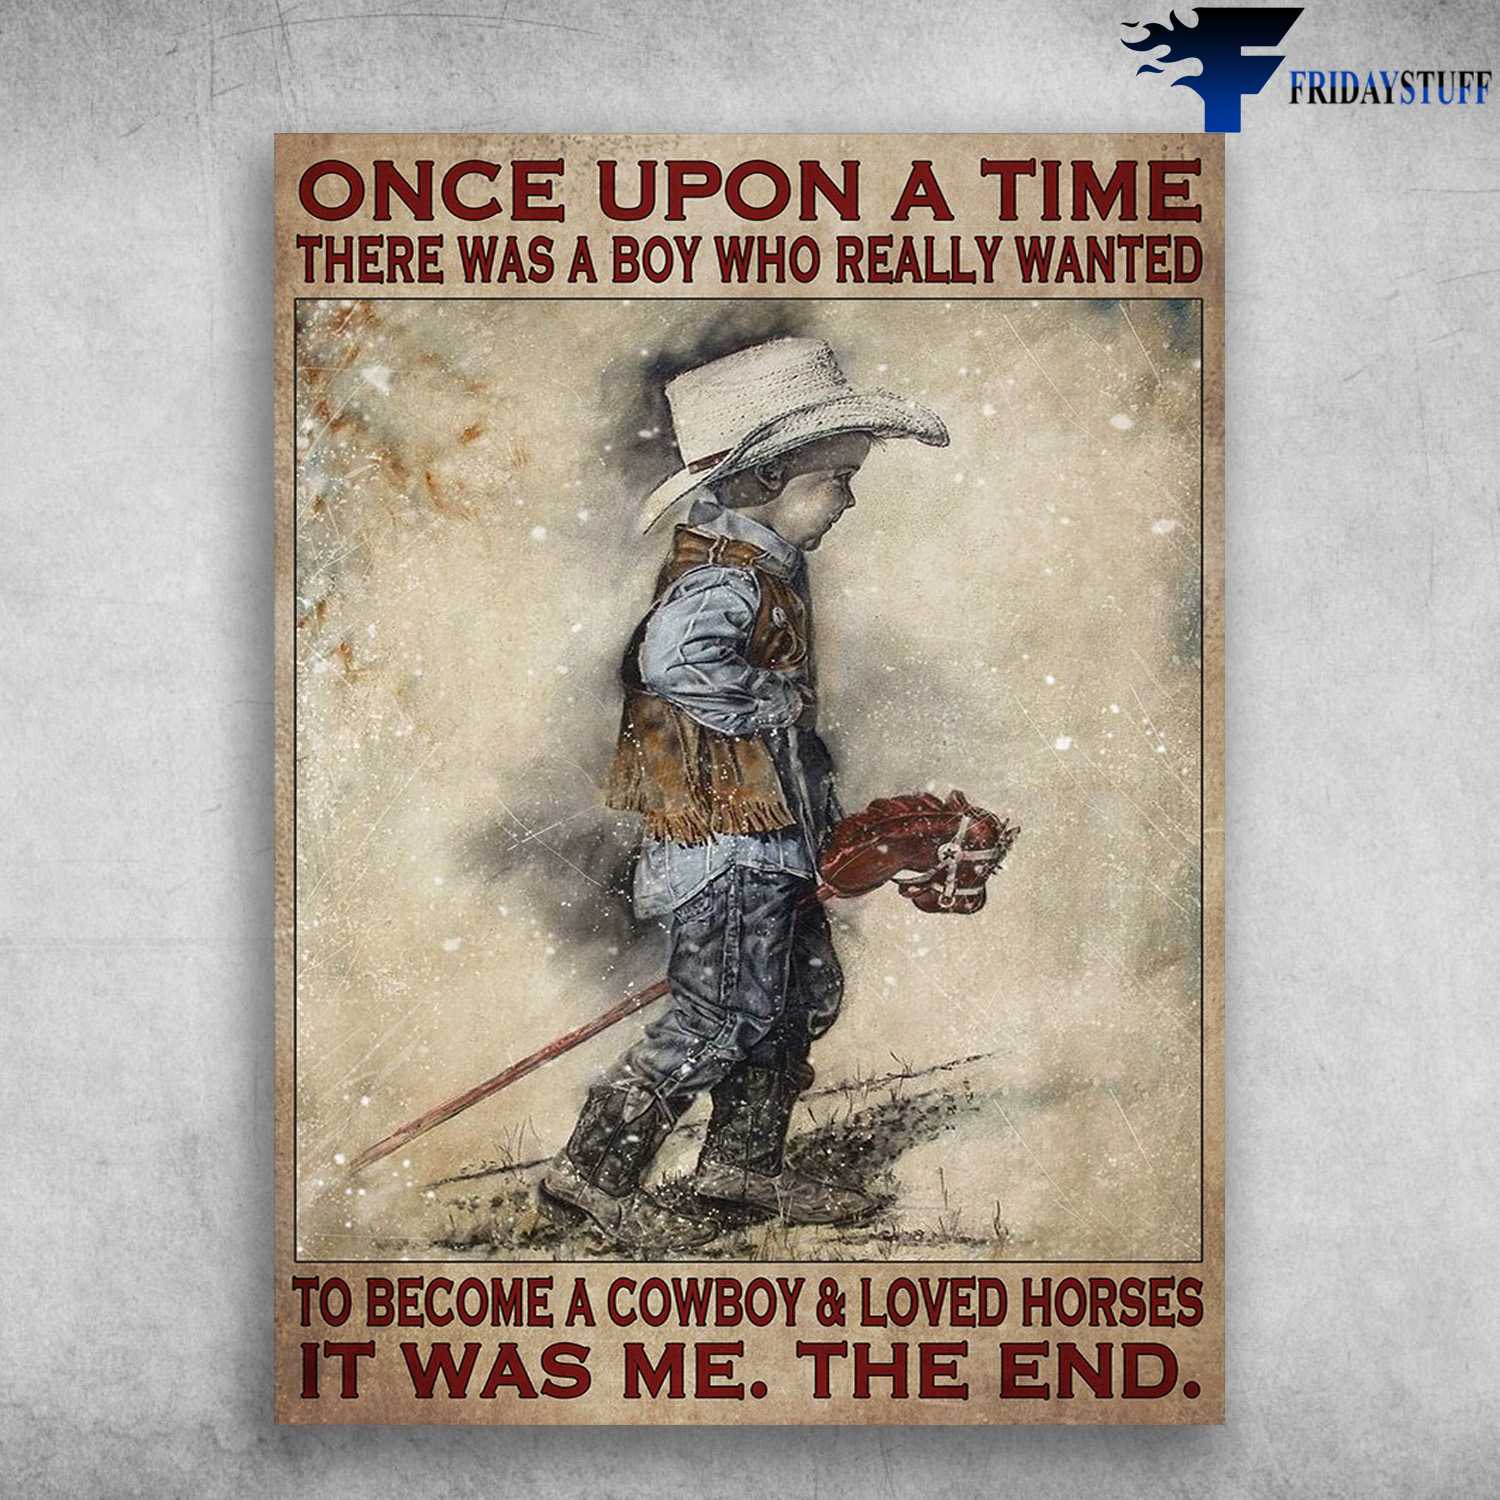 Little Cowboy, Horse Poster - Once Upon A Time, There Was A Boy, Who Really Wanted, To Become A Cowboy And Loved Horses, It Was Me, The End